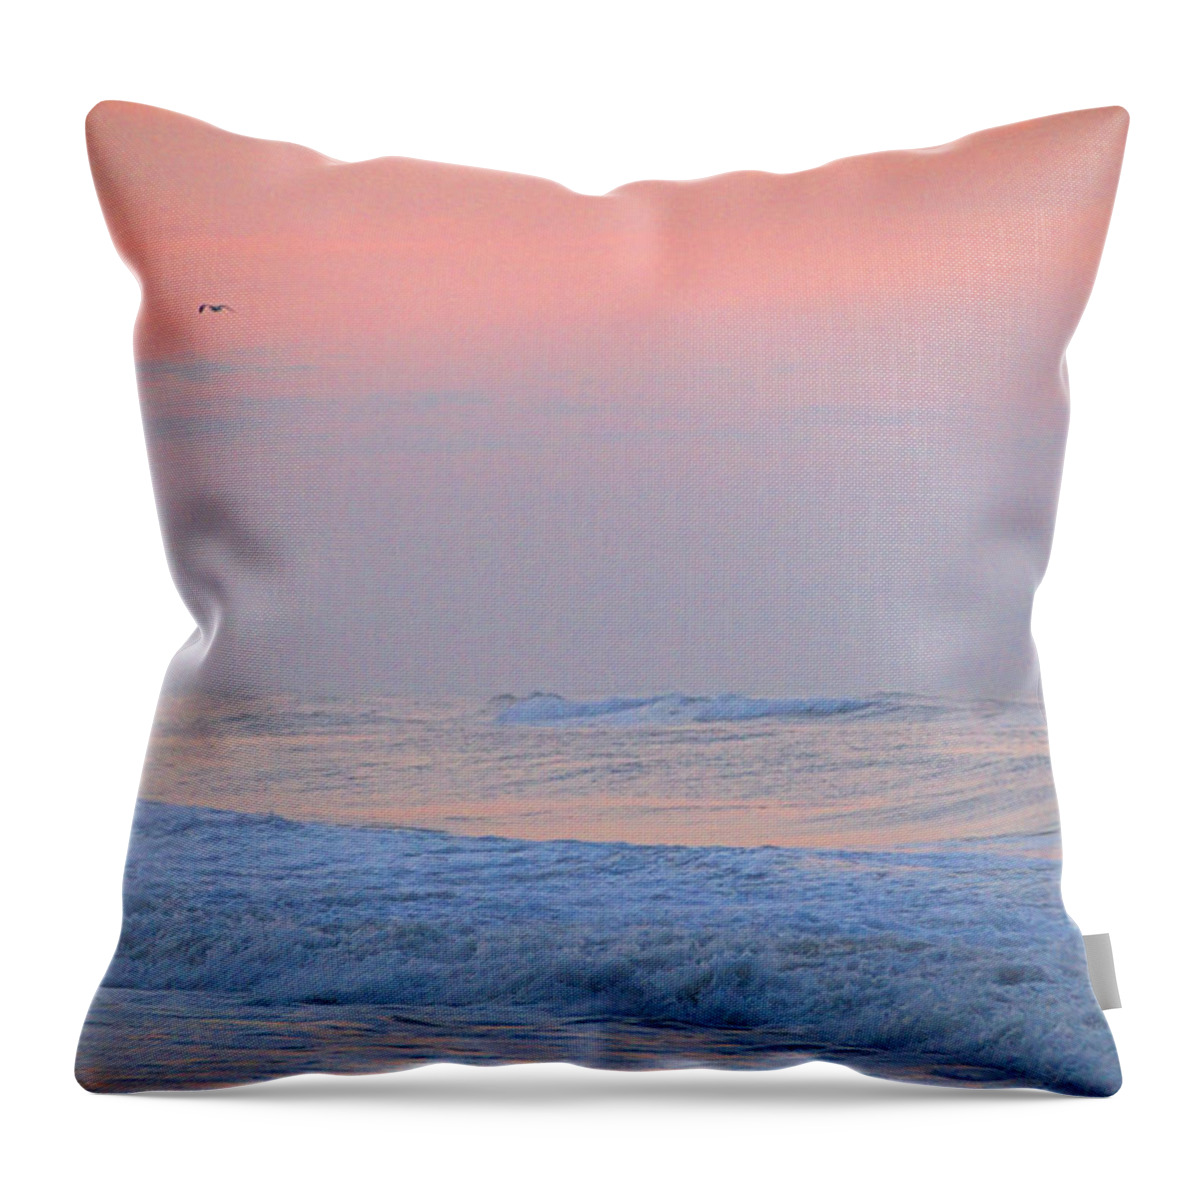 Ocean Throw Pillow featuring the photograph Ocean Peace by Newwwman